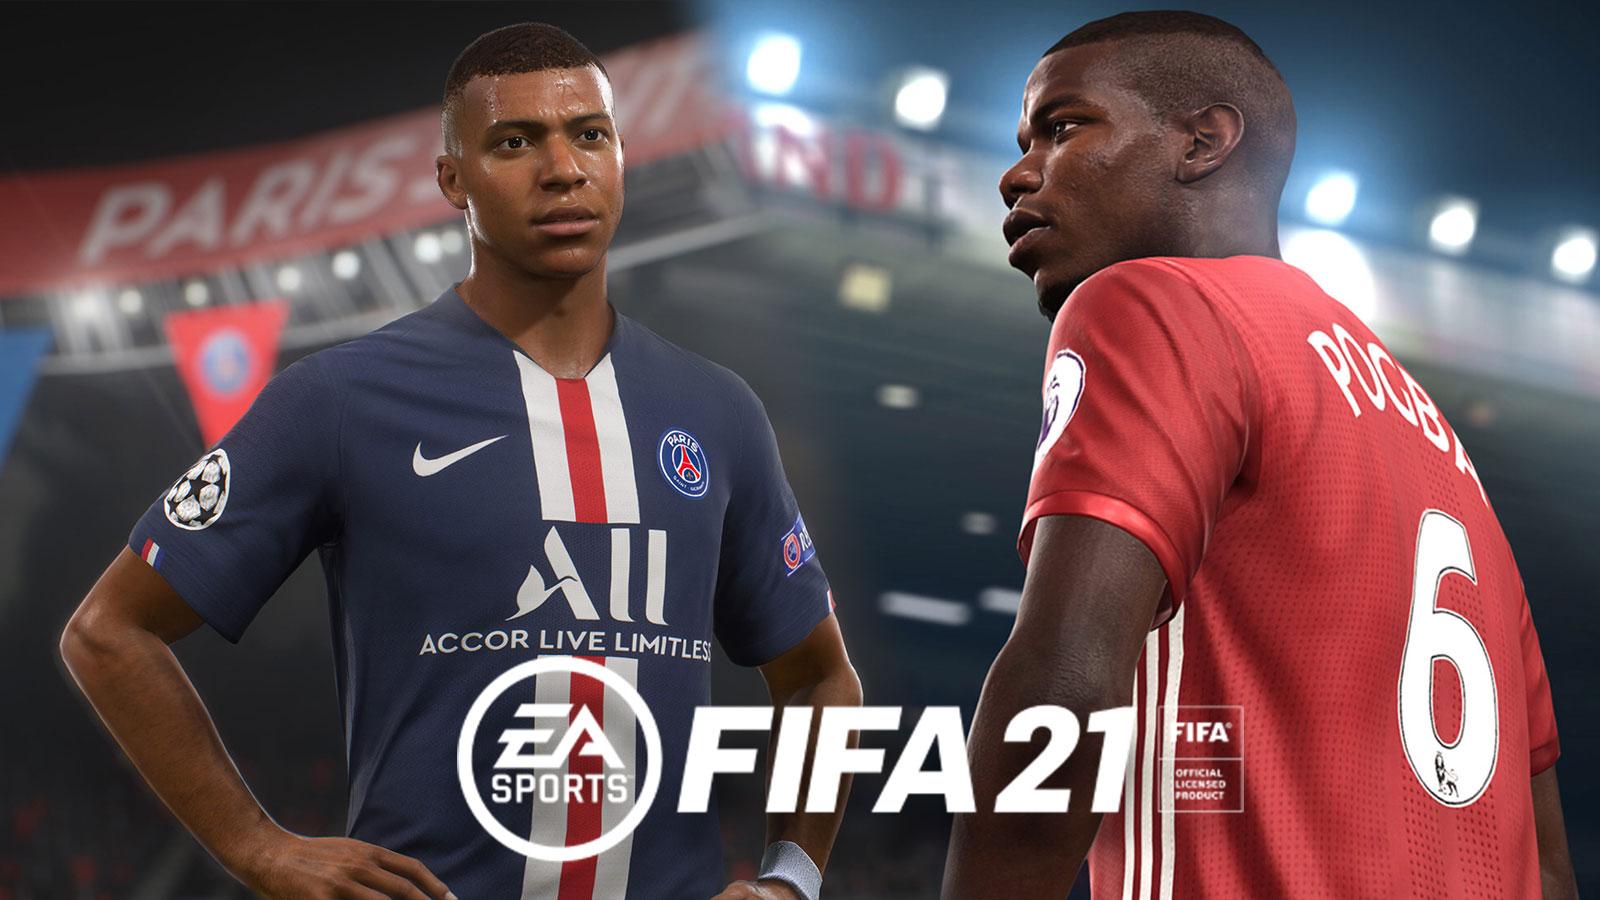 Mbappe Pogba FIFA 21 top Skill players